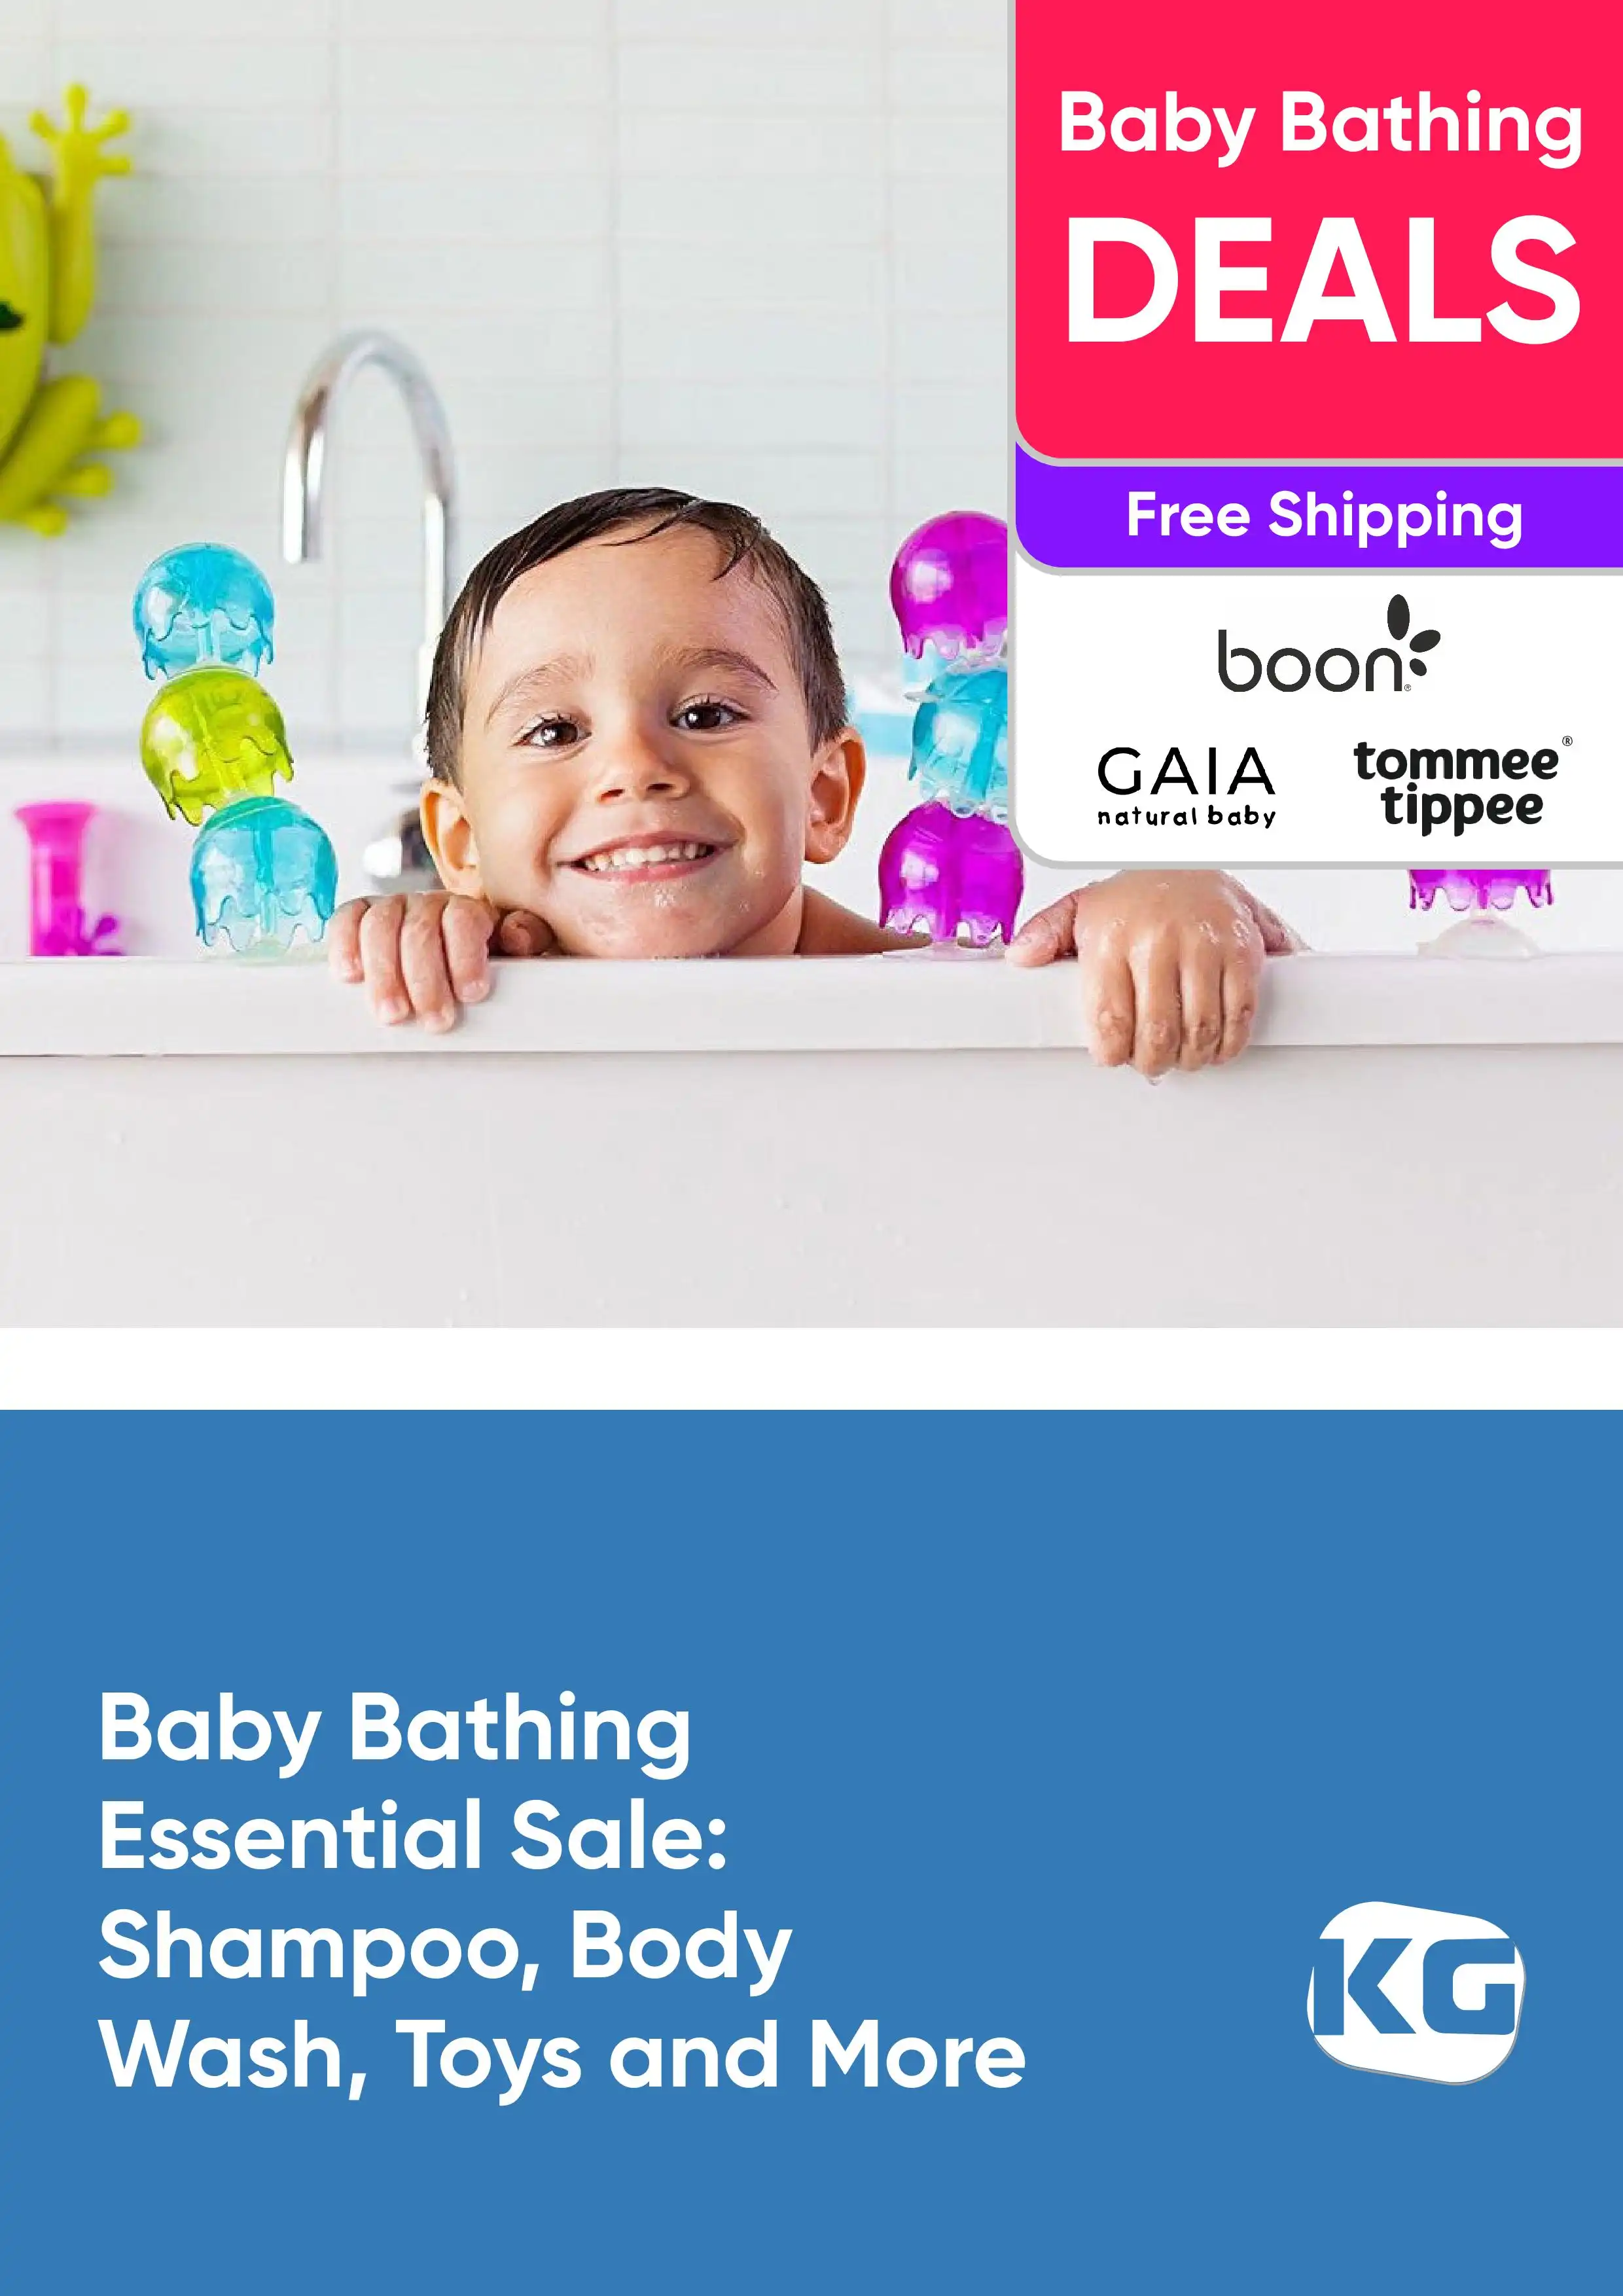 Baby Bathing Essential Sale - Shampoo, Body Wash, Toys and More - Gaia, Boon, Tommee Tippee